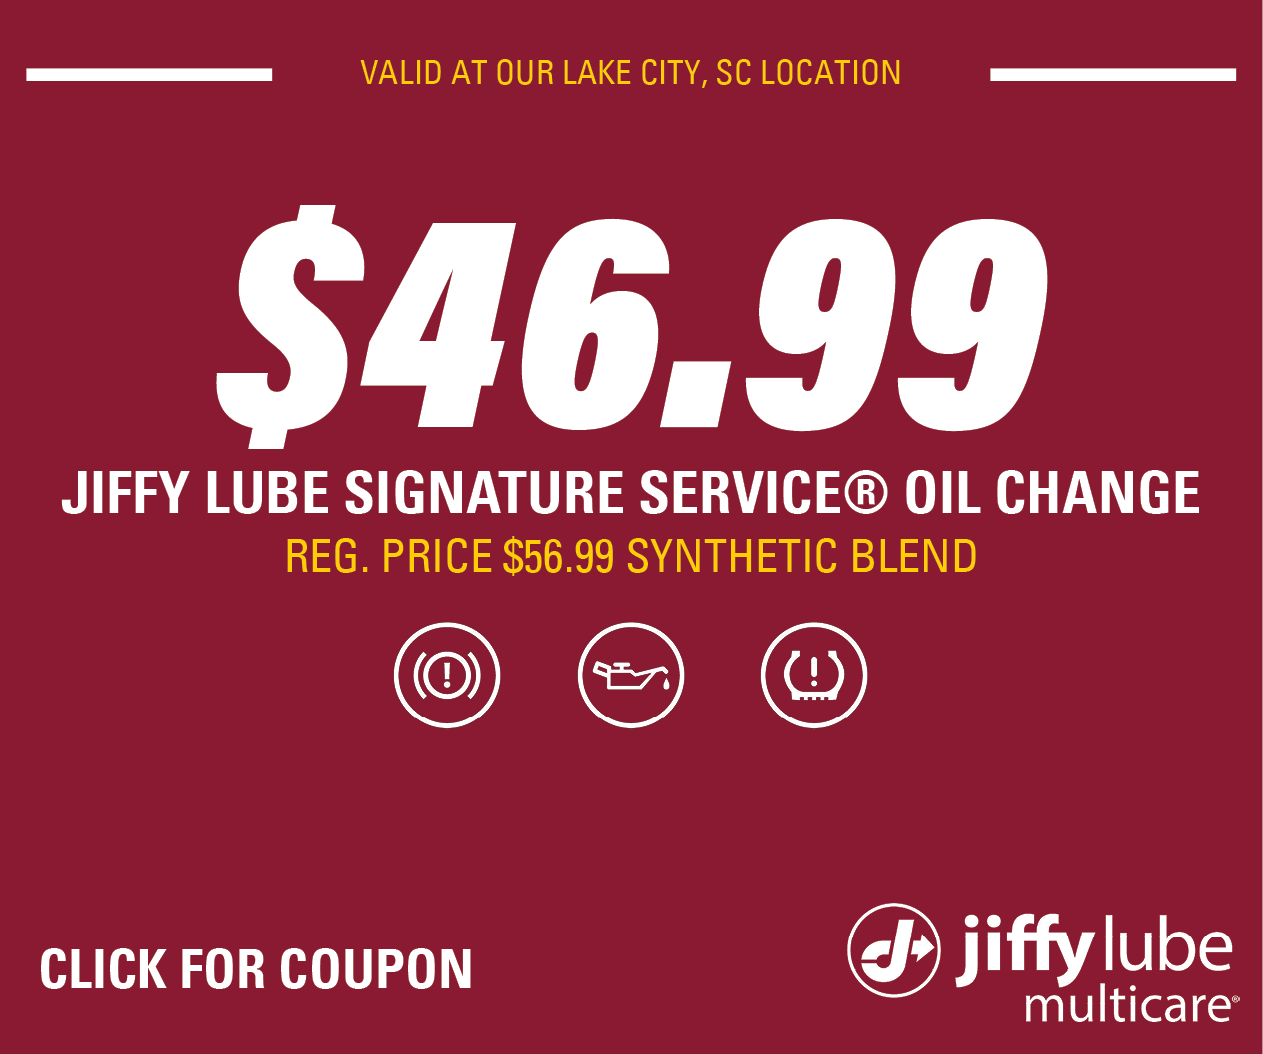 $46.99 Synthetic Blend SSOC Lake City Website Image (Bronco Lube)